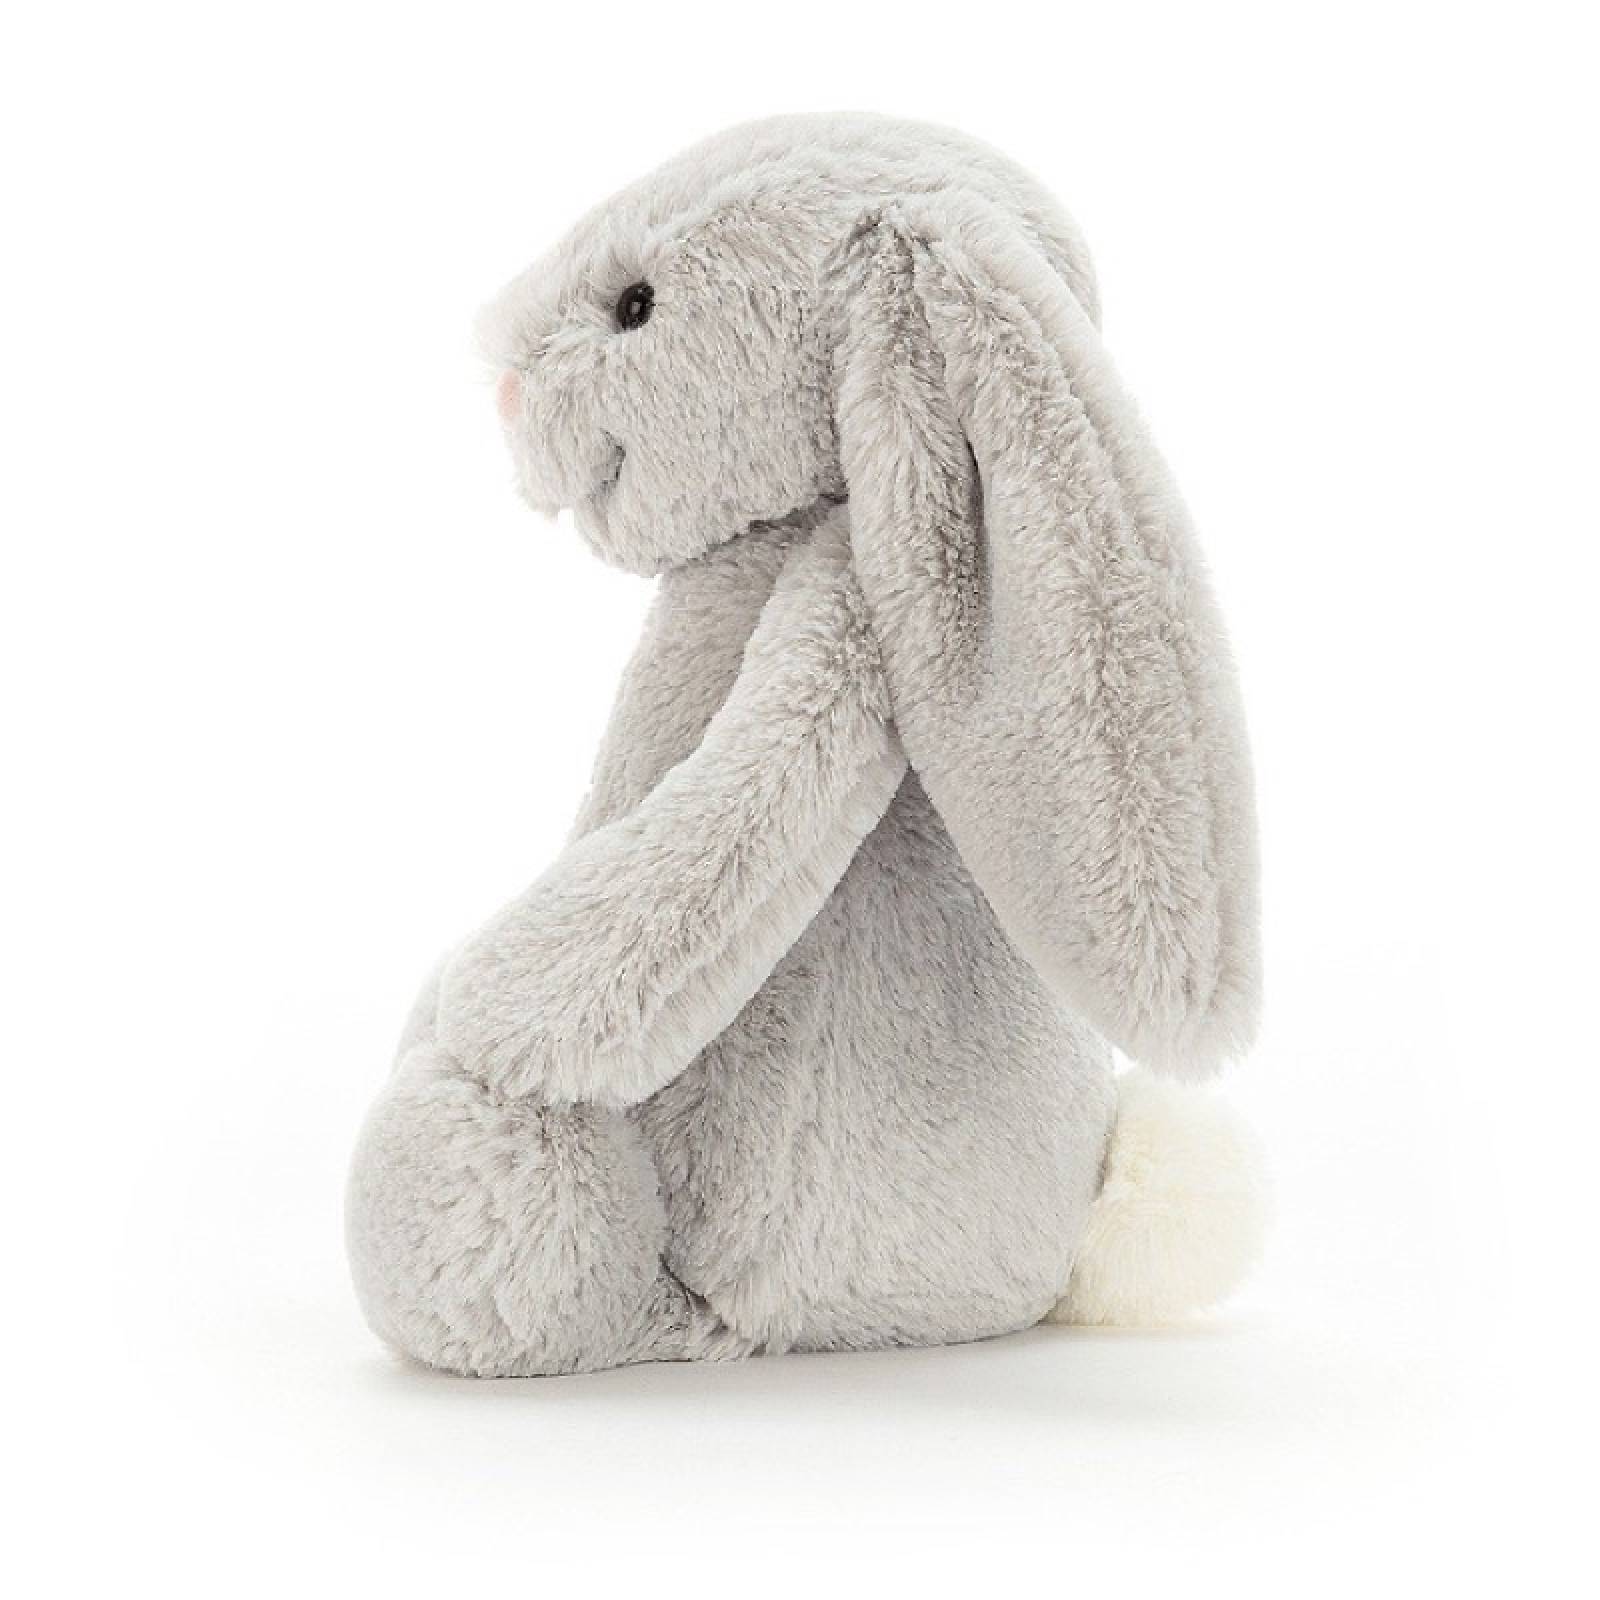 Huge Bashful Bunny In Silver Soft Toy By Jellycat thumbnails